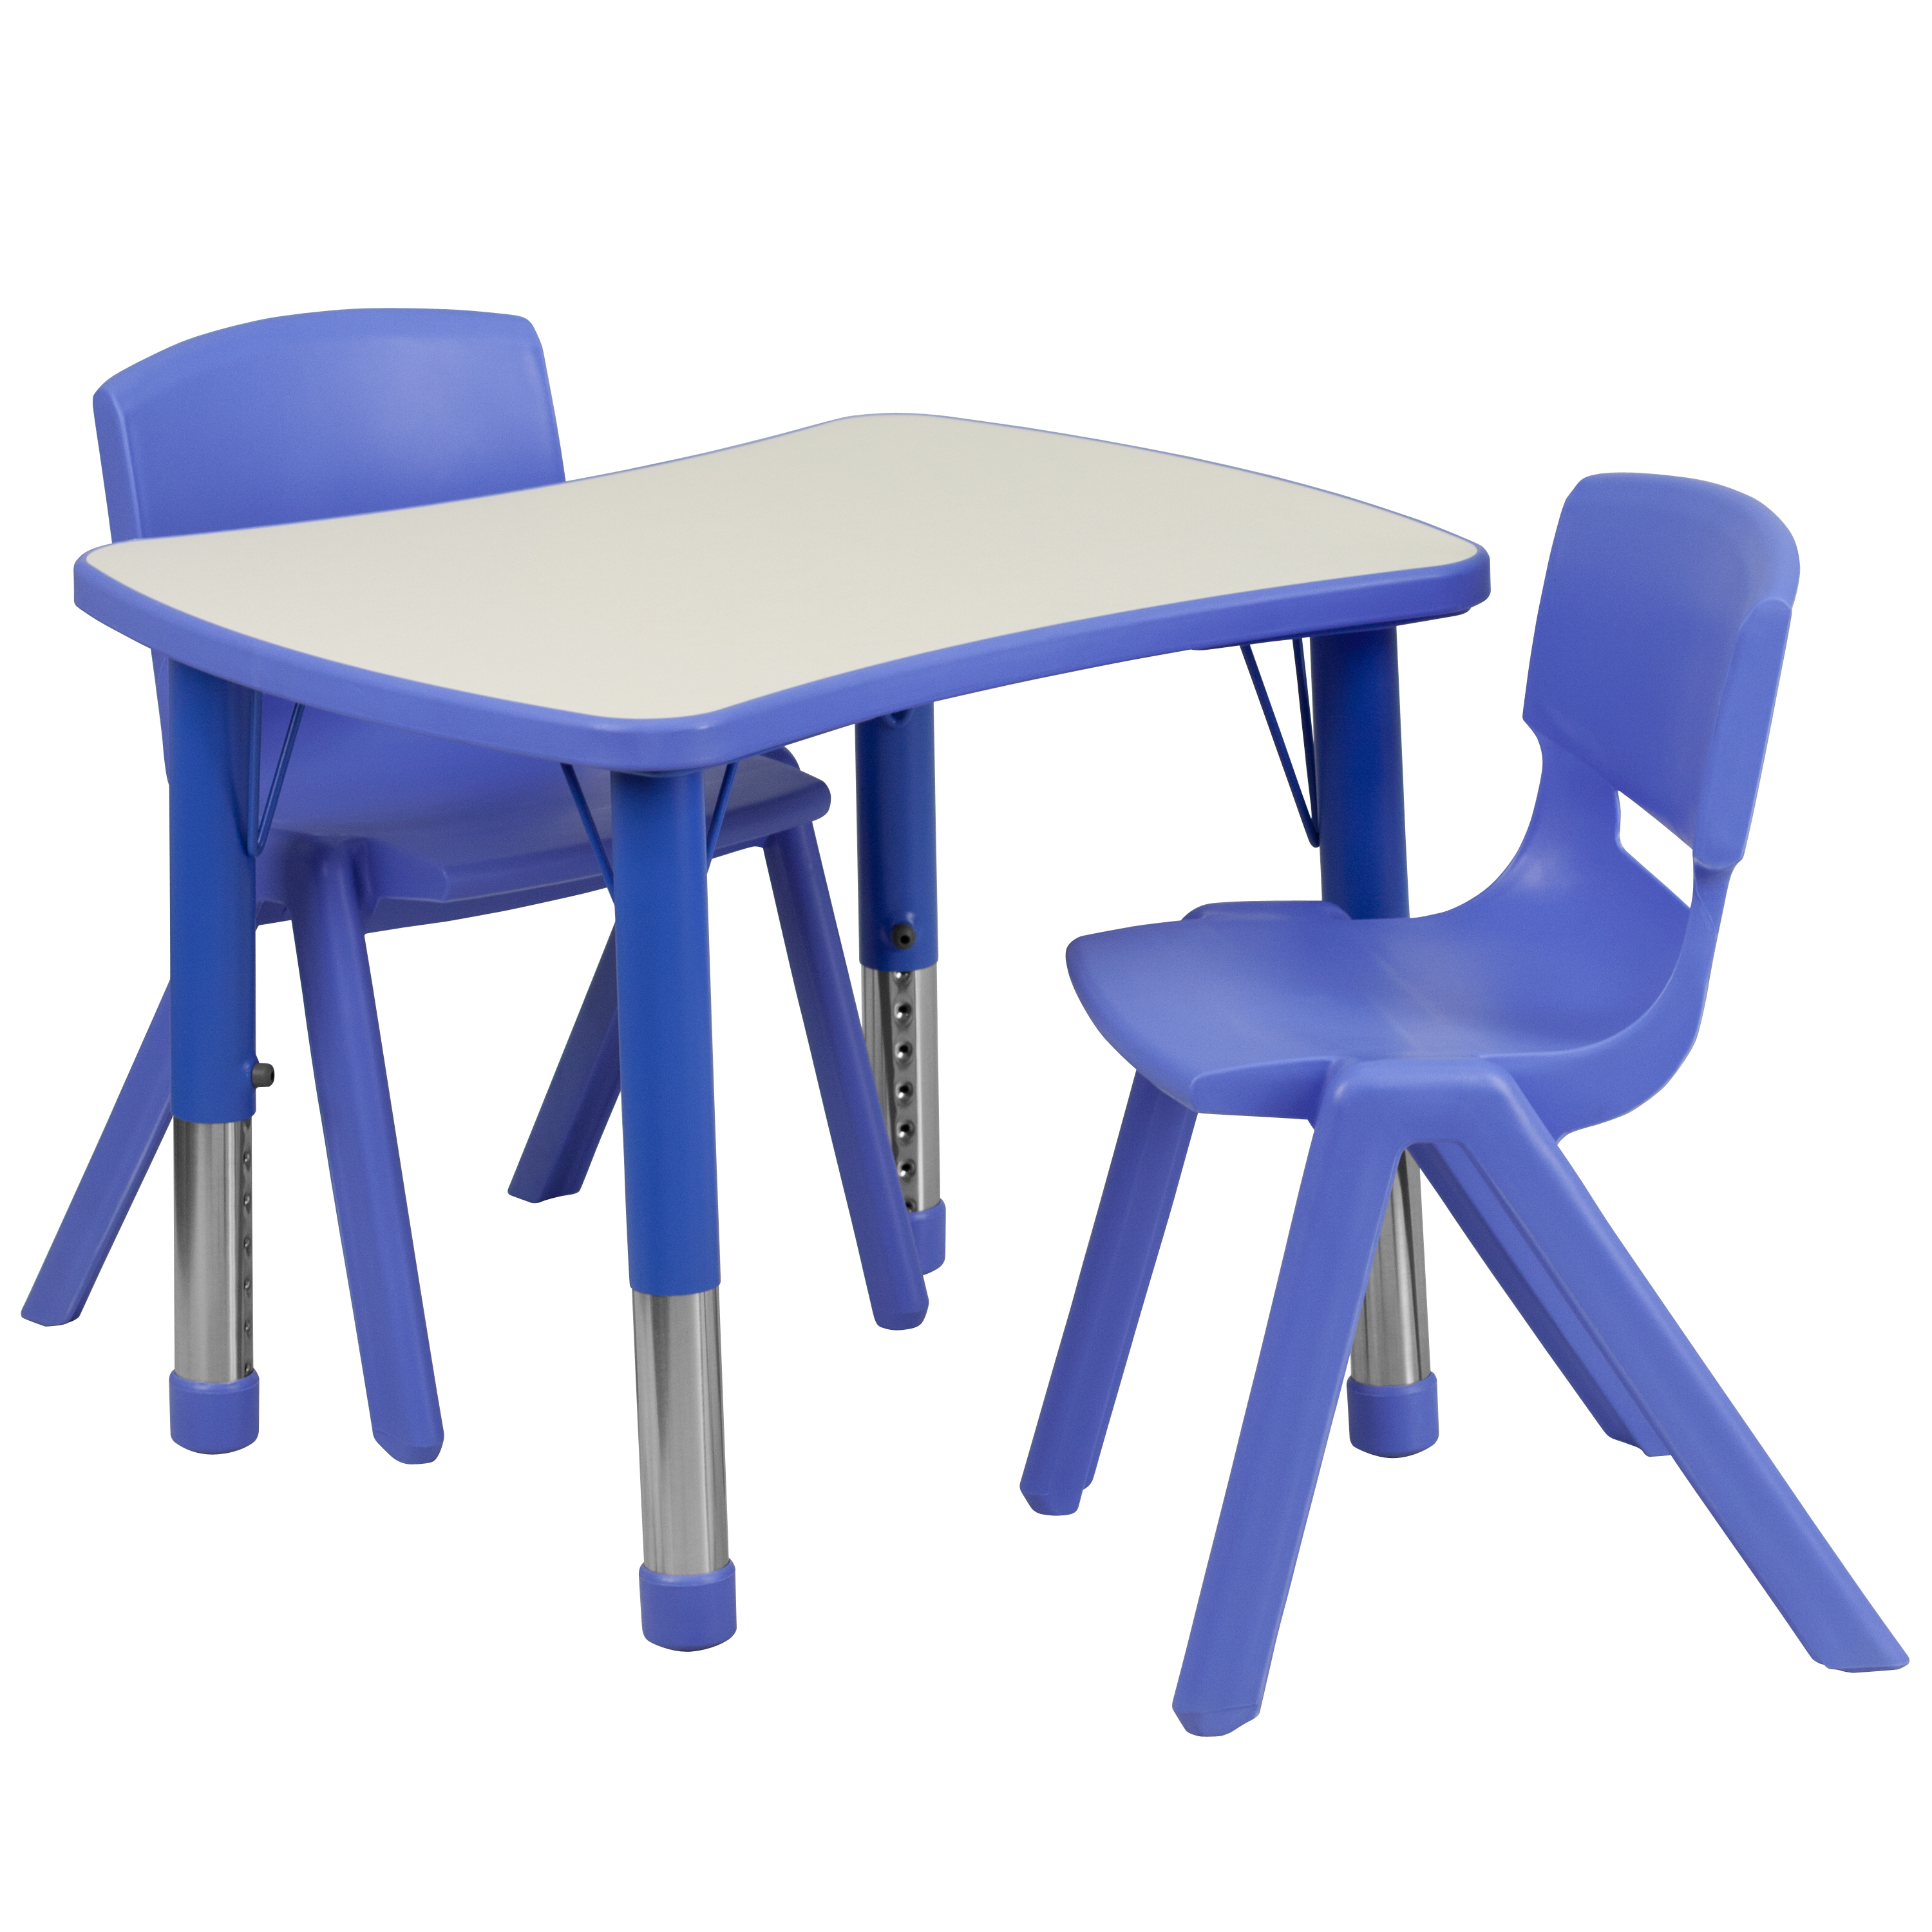 Flash Furniture YU-YCY-098-0032-RECT-TBL-BLUE-GG 21.875''W x 26.625''L Rectangular Blue Plastic Height Adjustable Activity Table with 2 Chairs